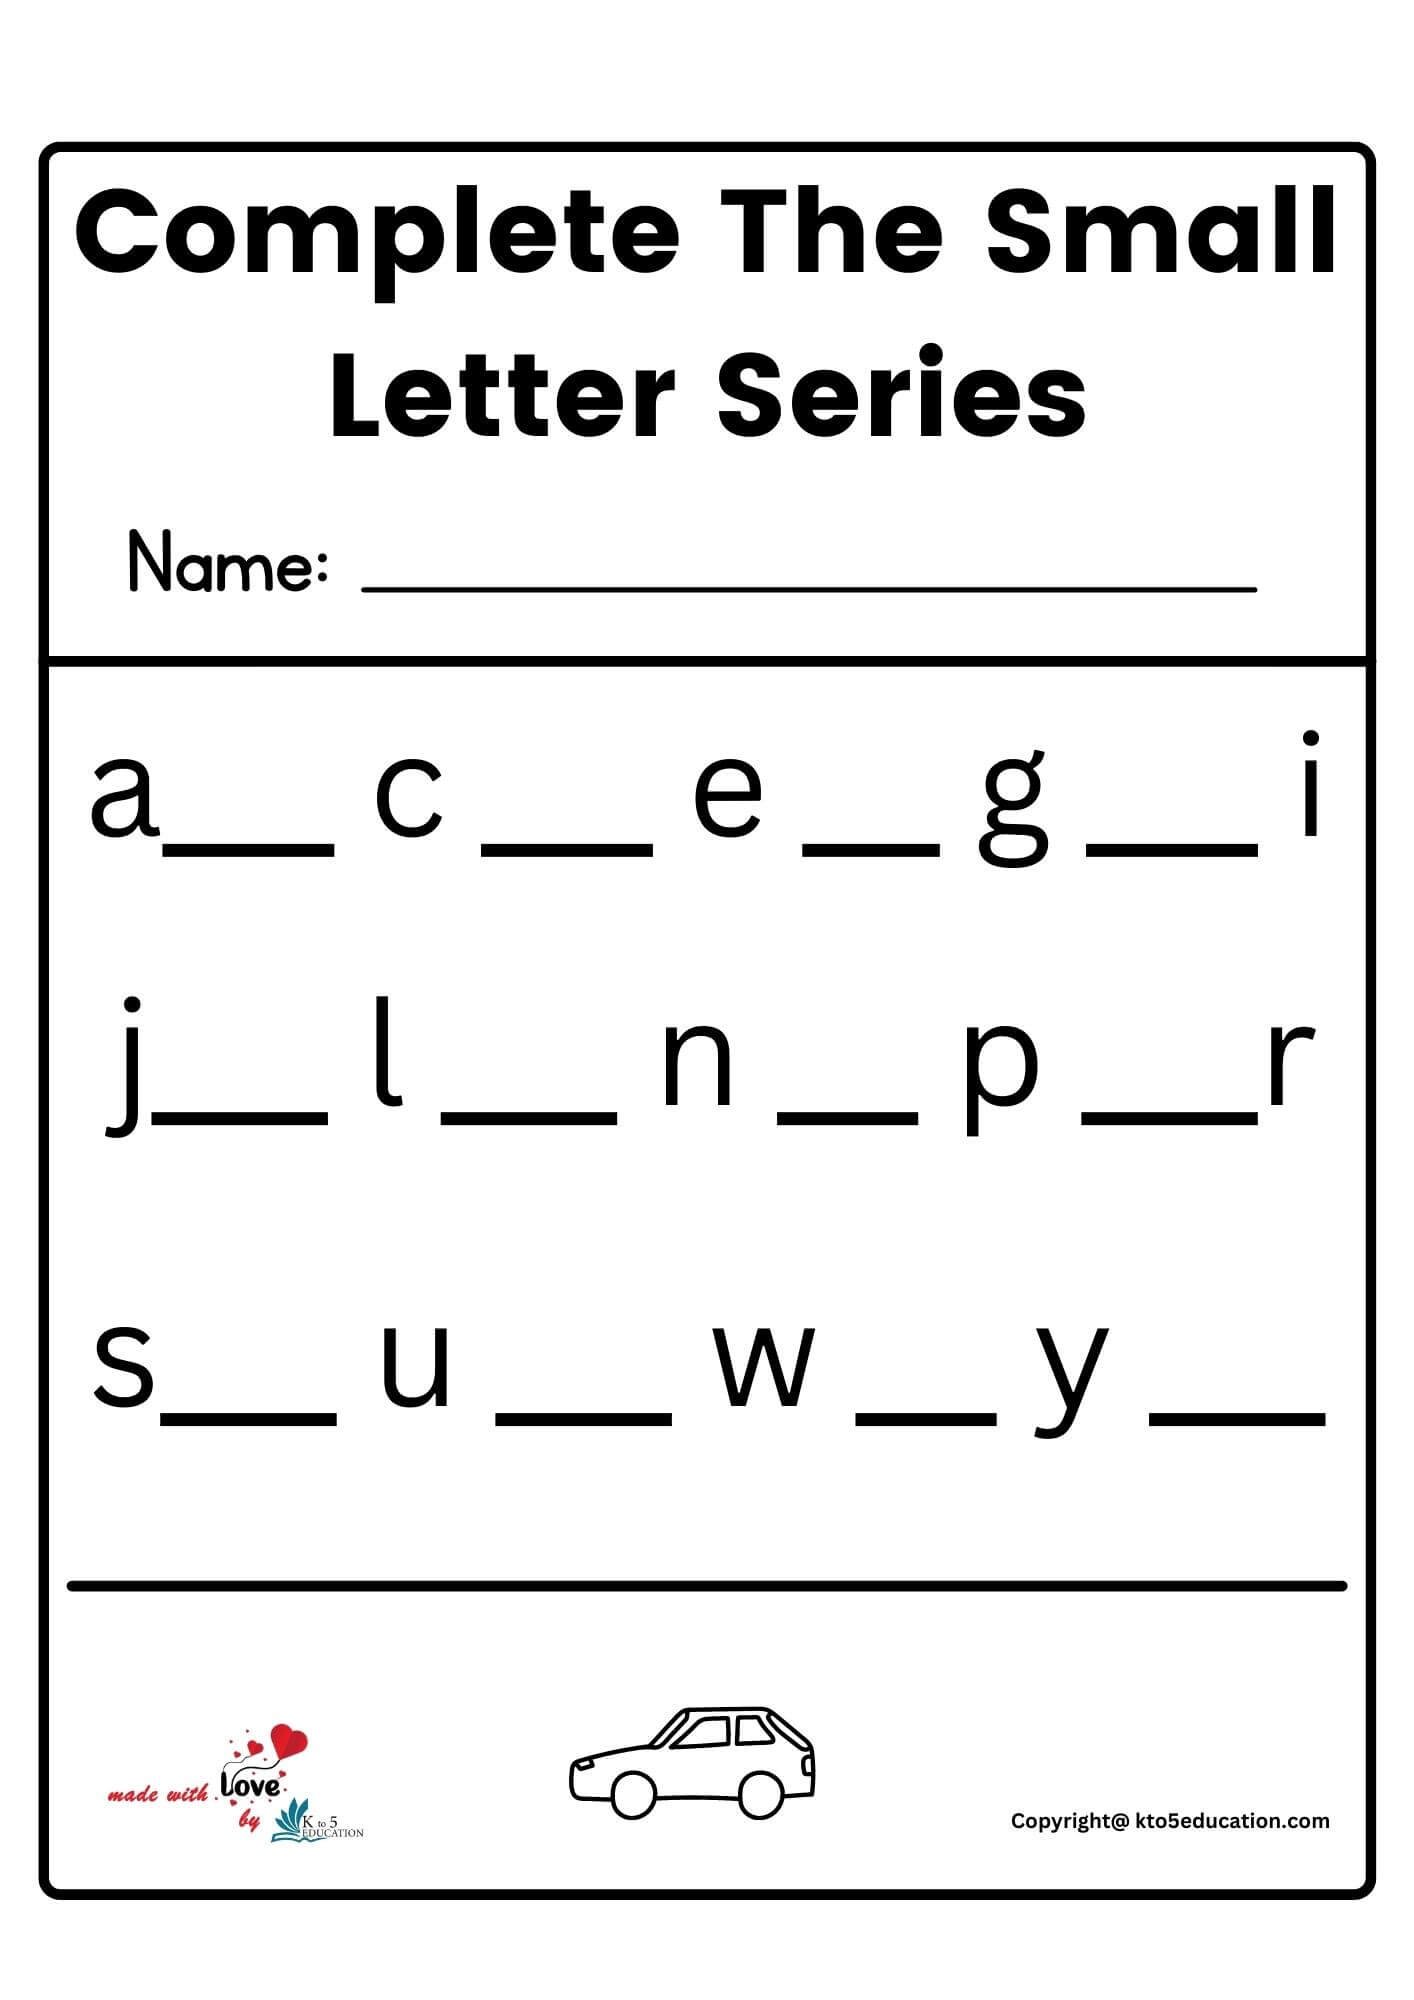 Complete The Small Letter Series